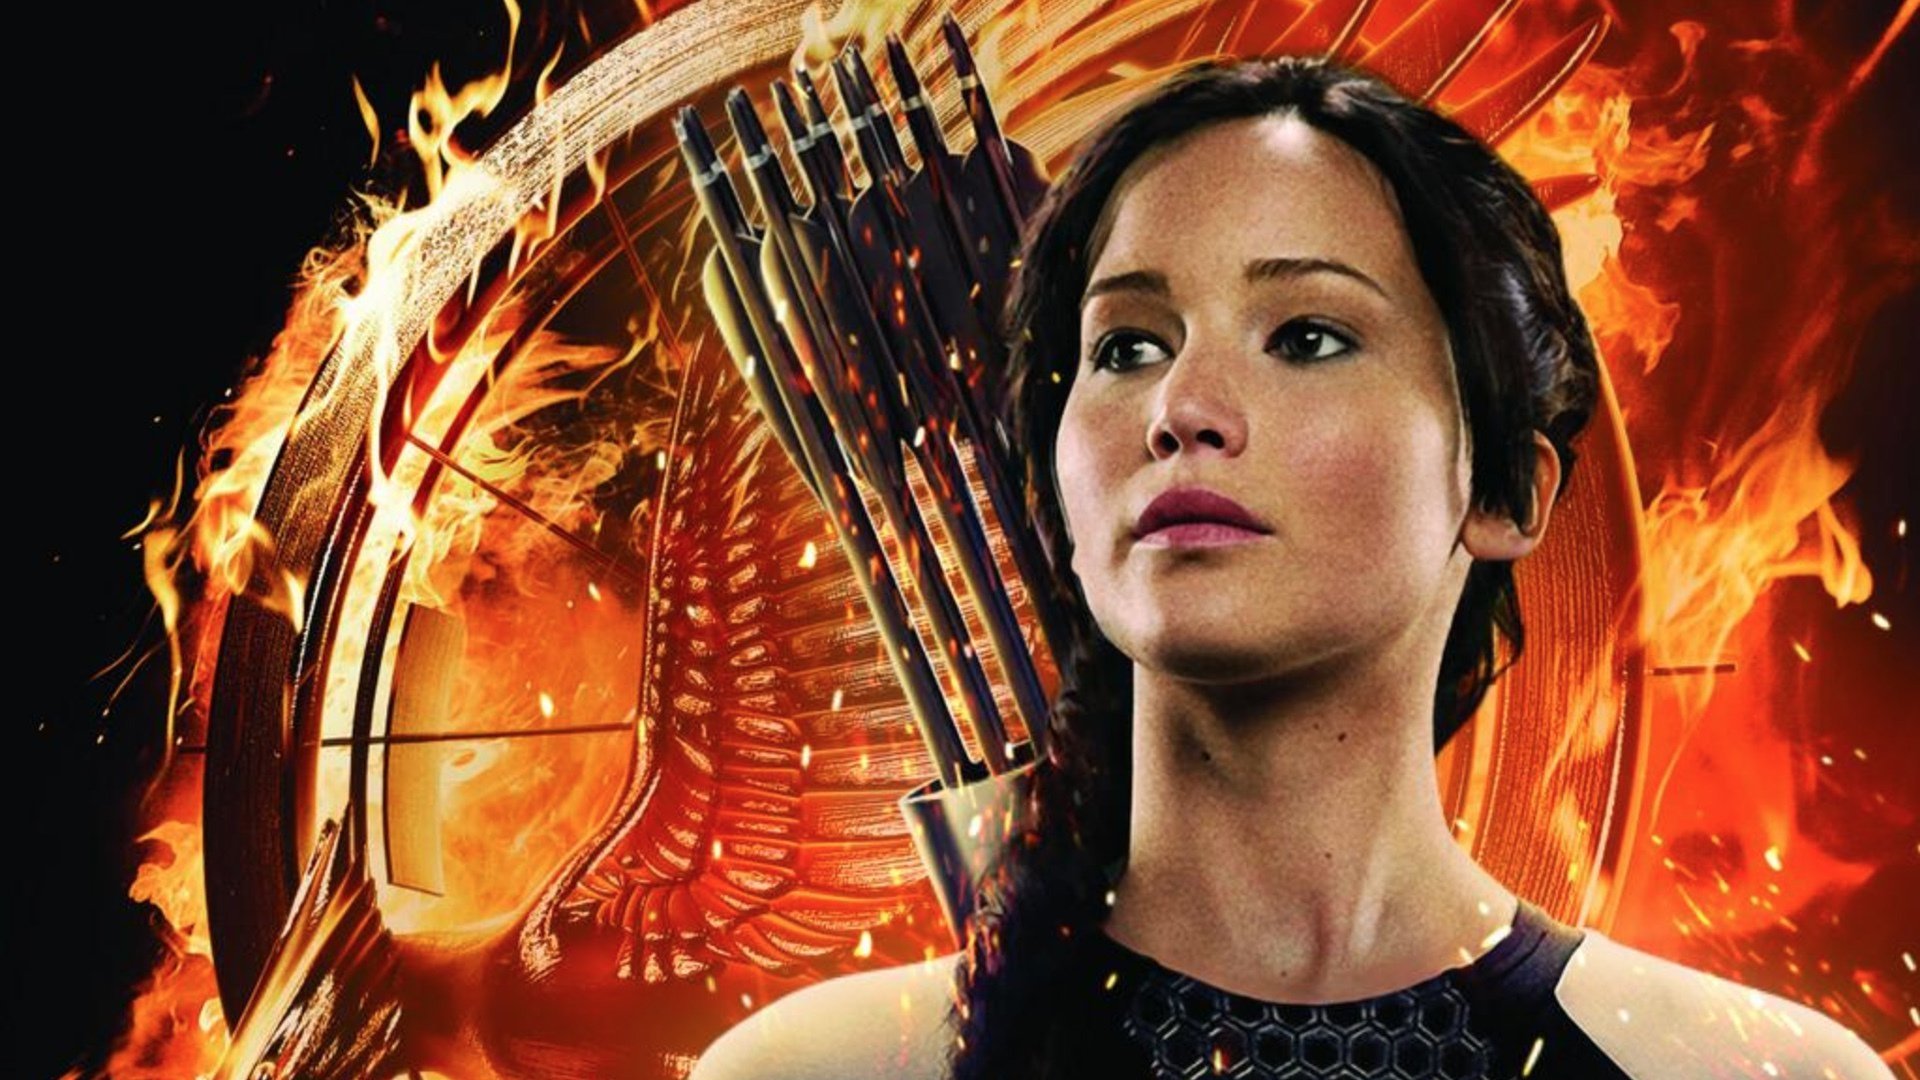 Movie The Hunger Games: Mockingjay - Part 1 The Hunger Games Image. 